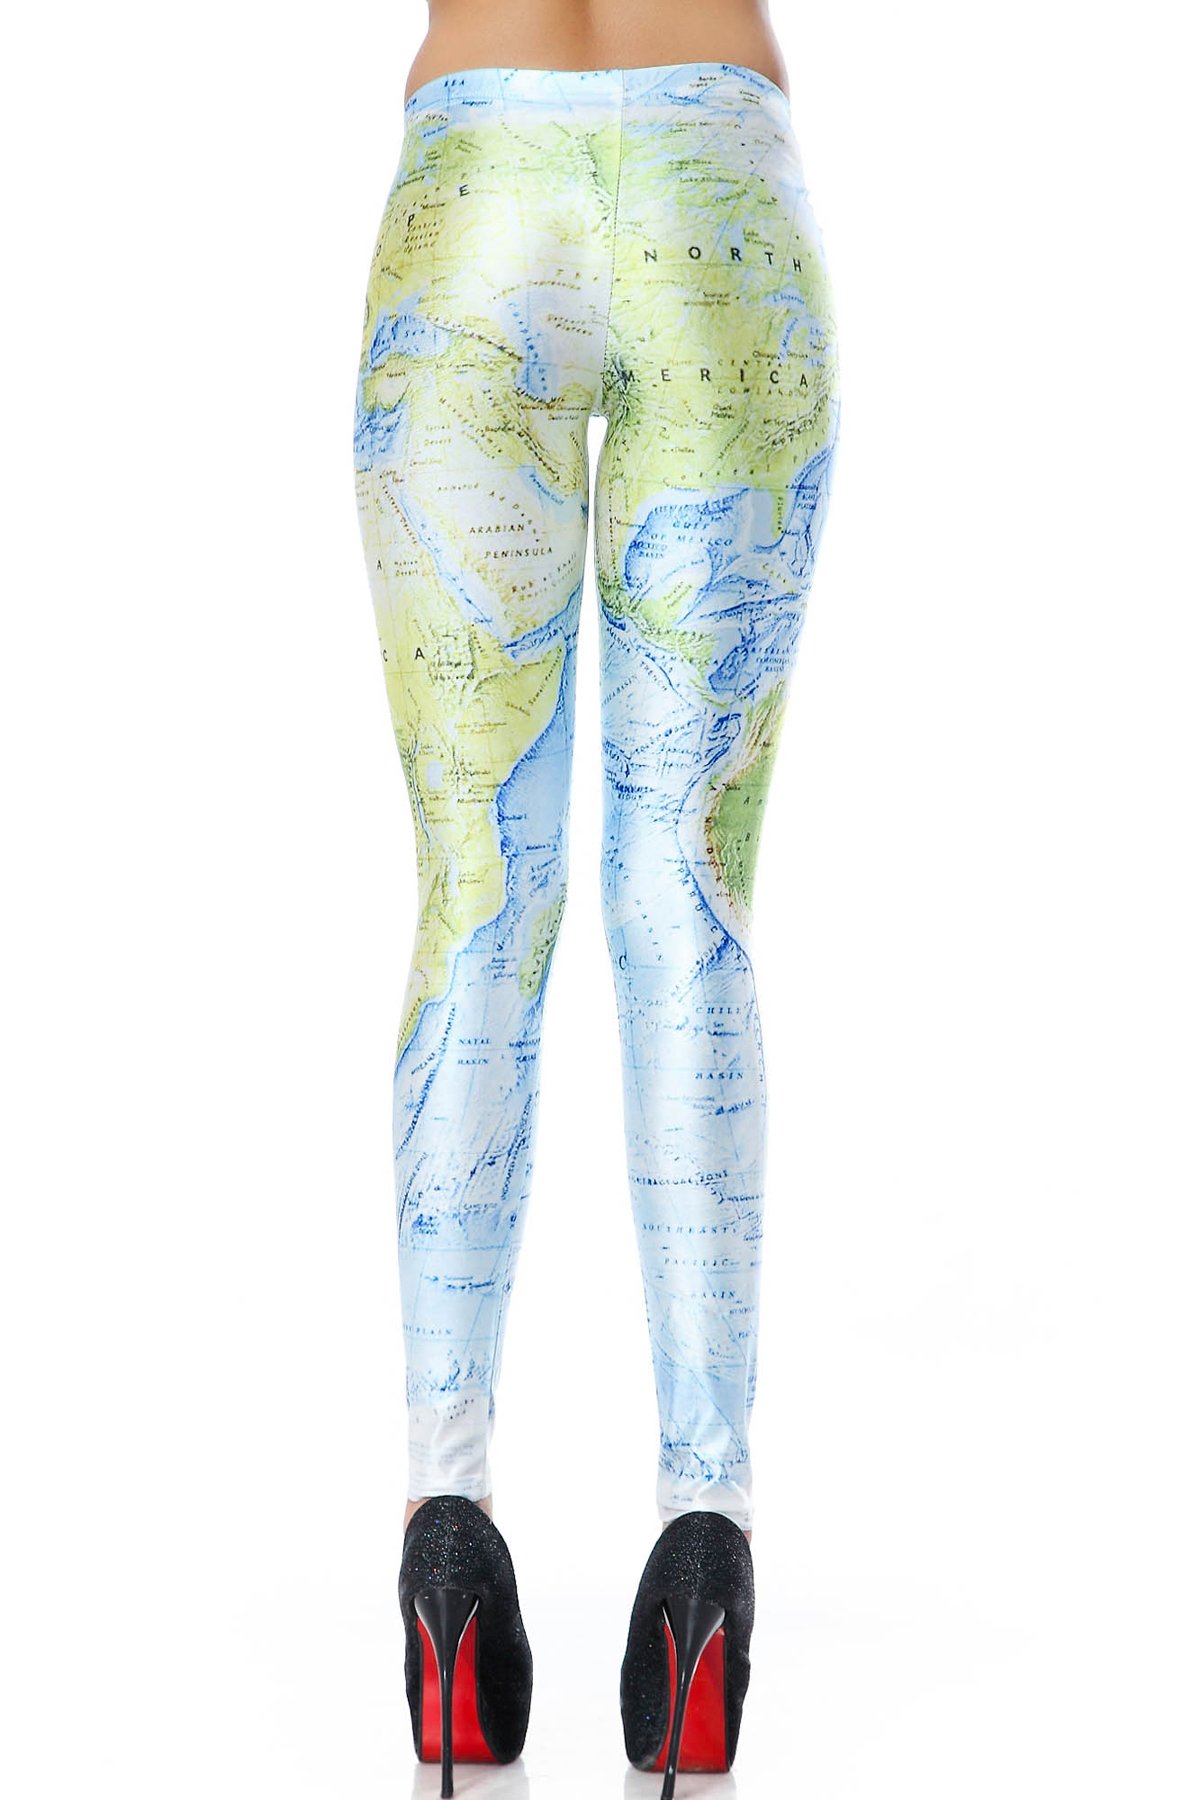 Lord of the ring Vintage map Leggings